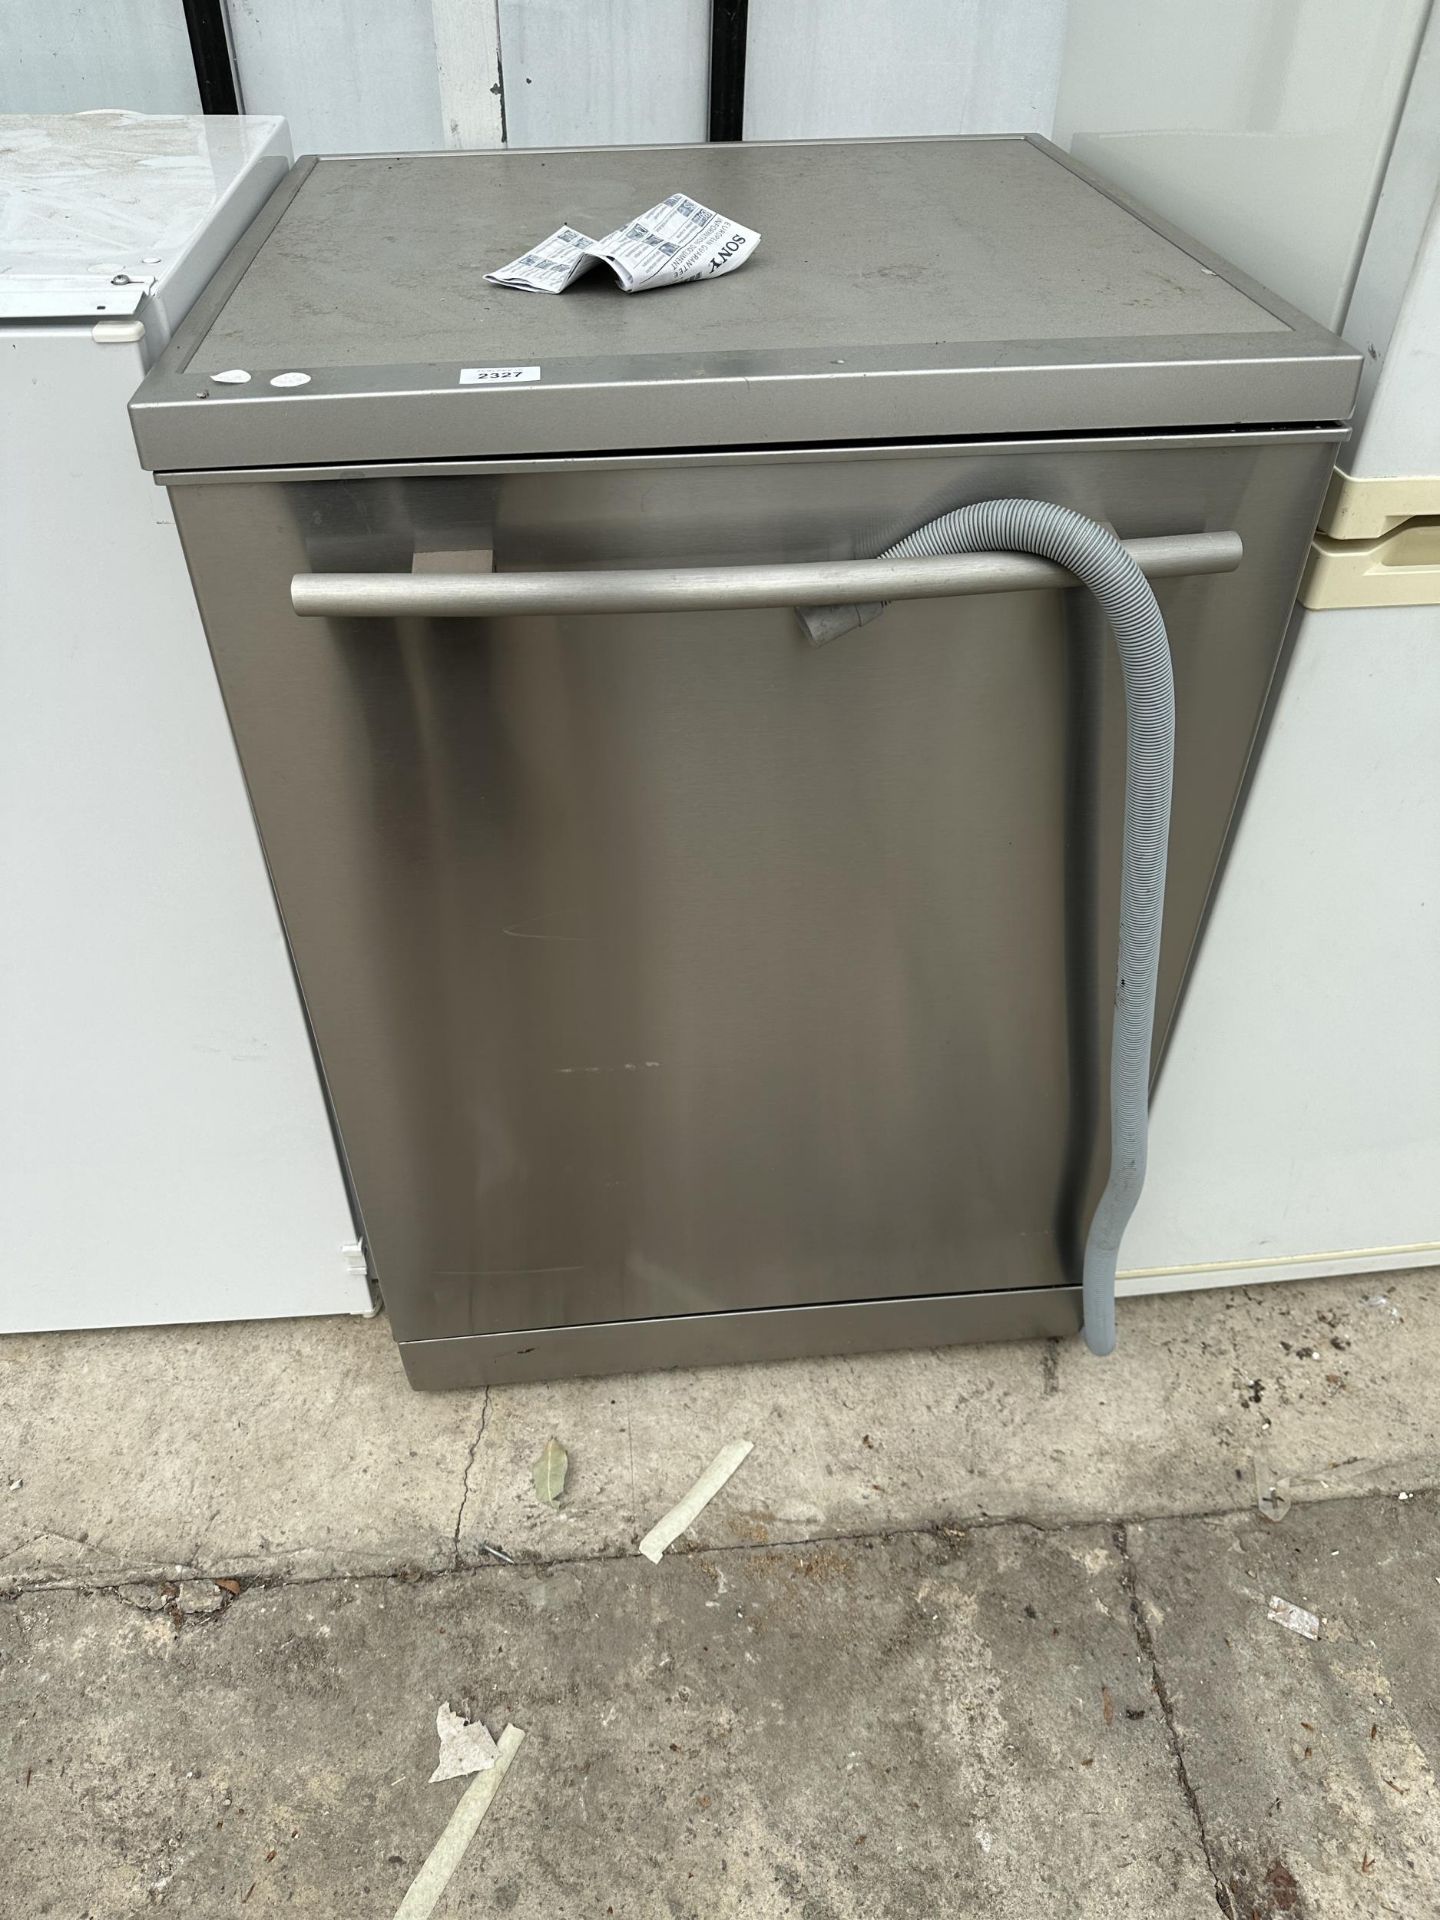 A SILVER ELECTRA DISH WASHER